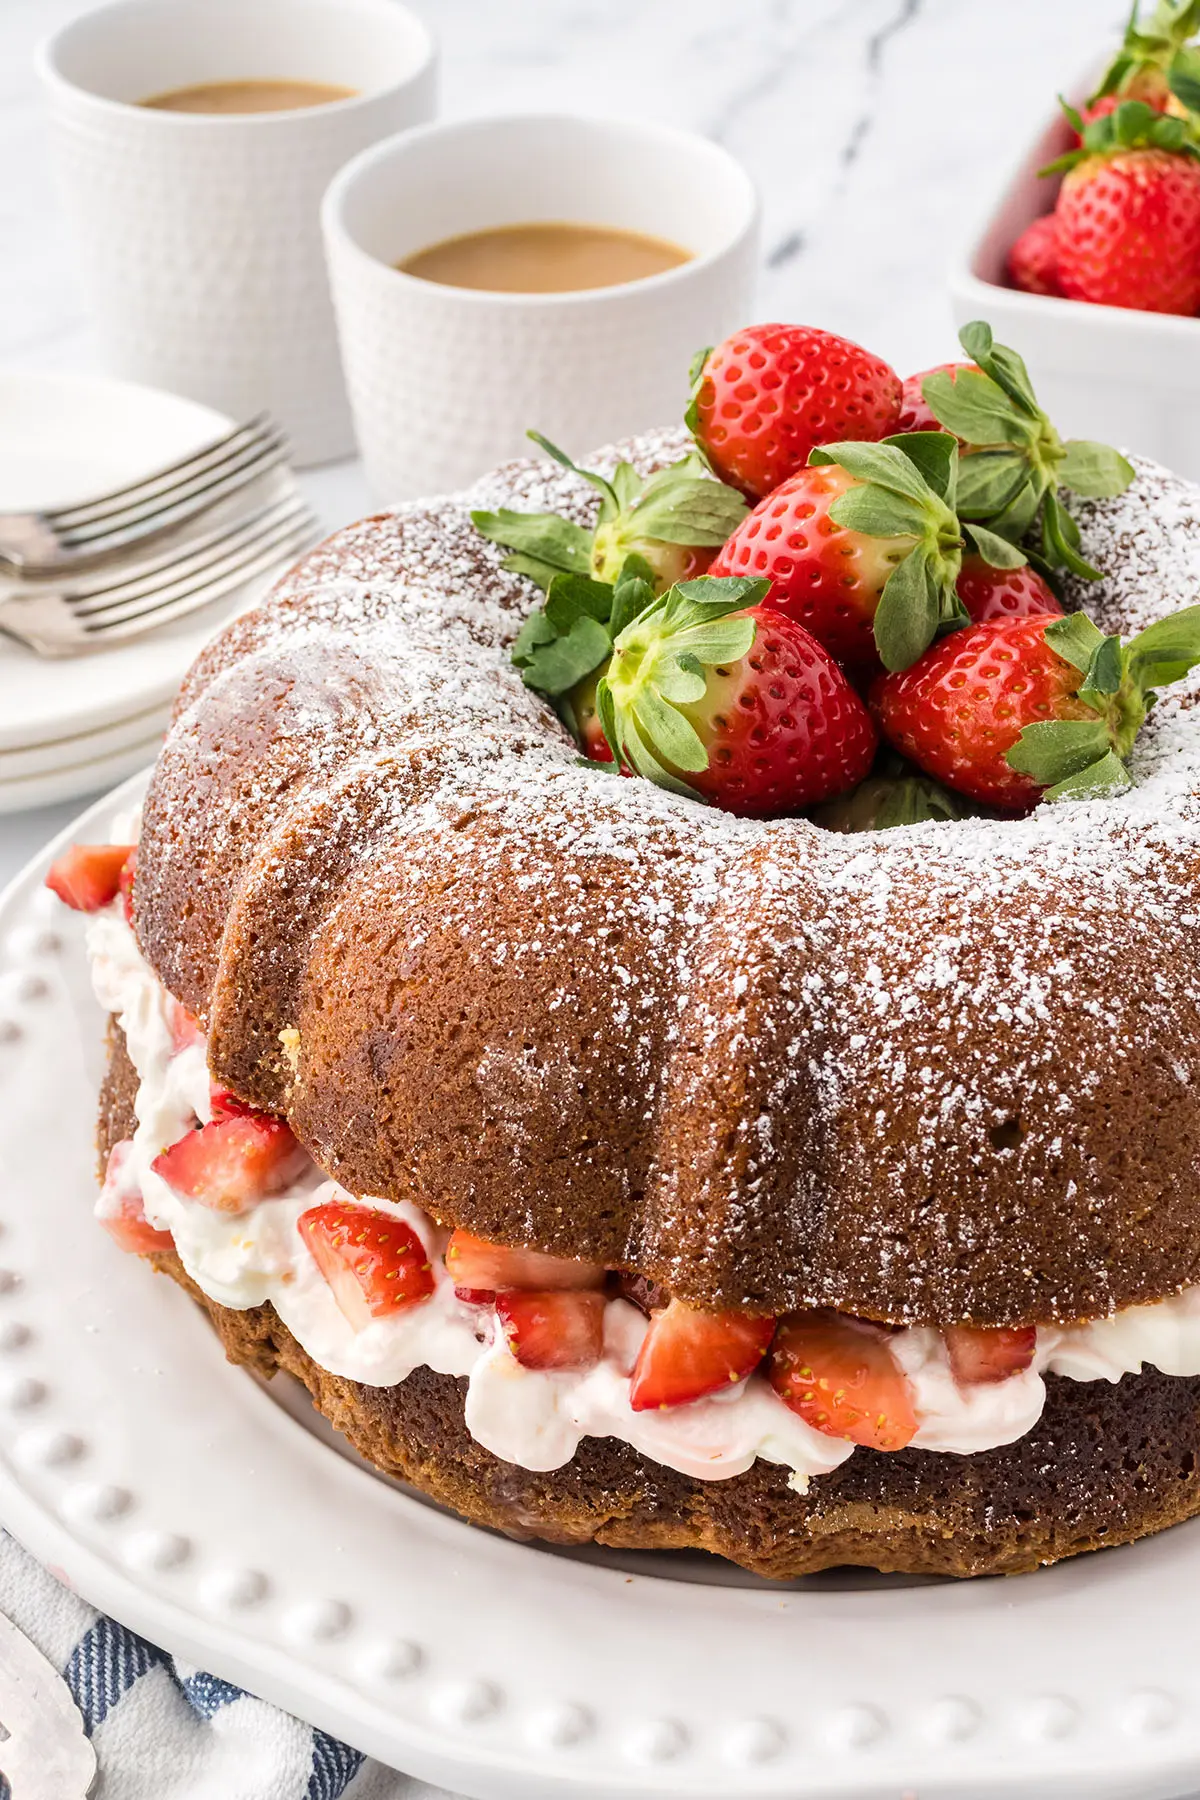 A strawberry shortcake bundt cake filled with whipped cream and topped with fresh strawberries.